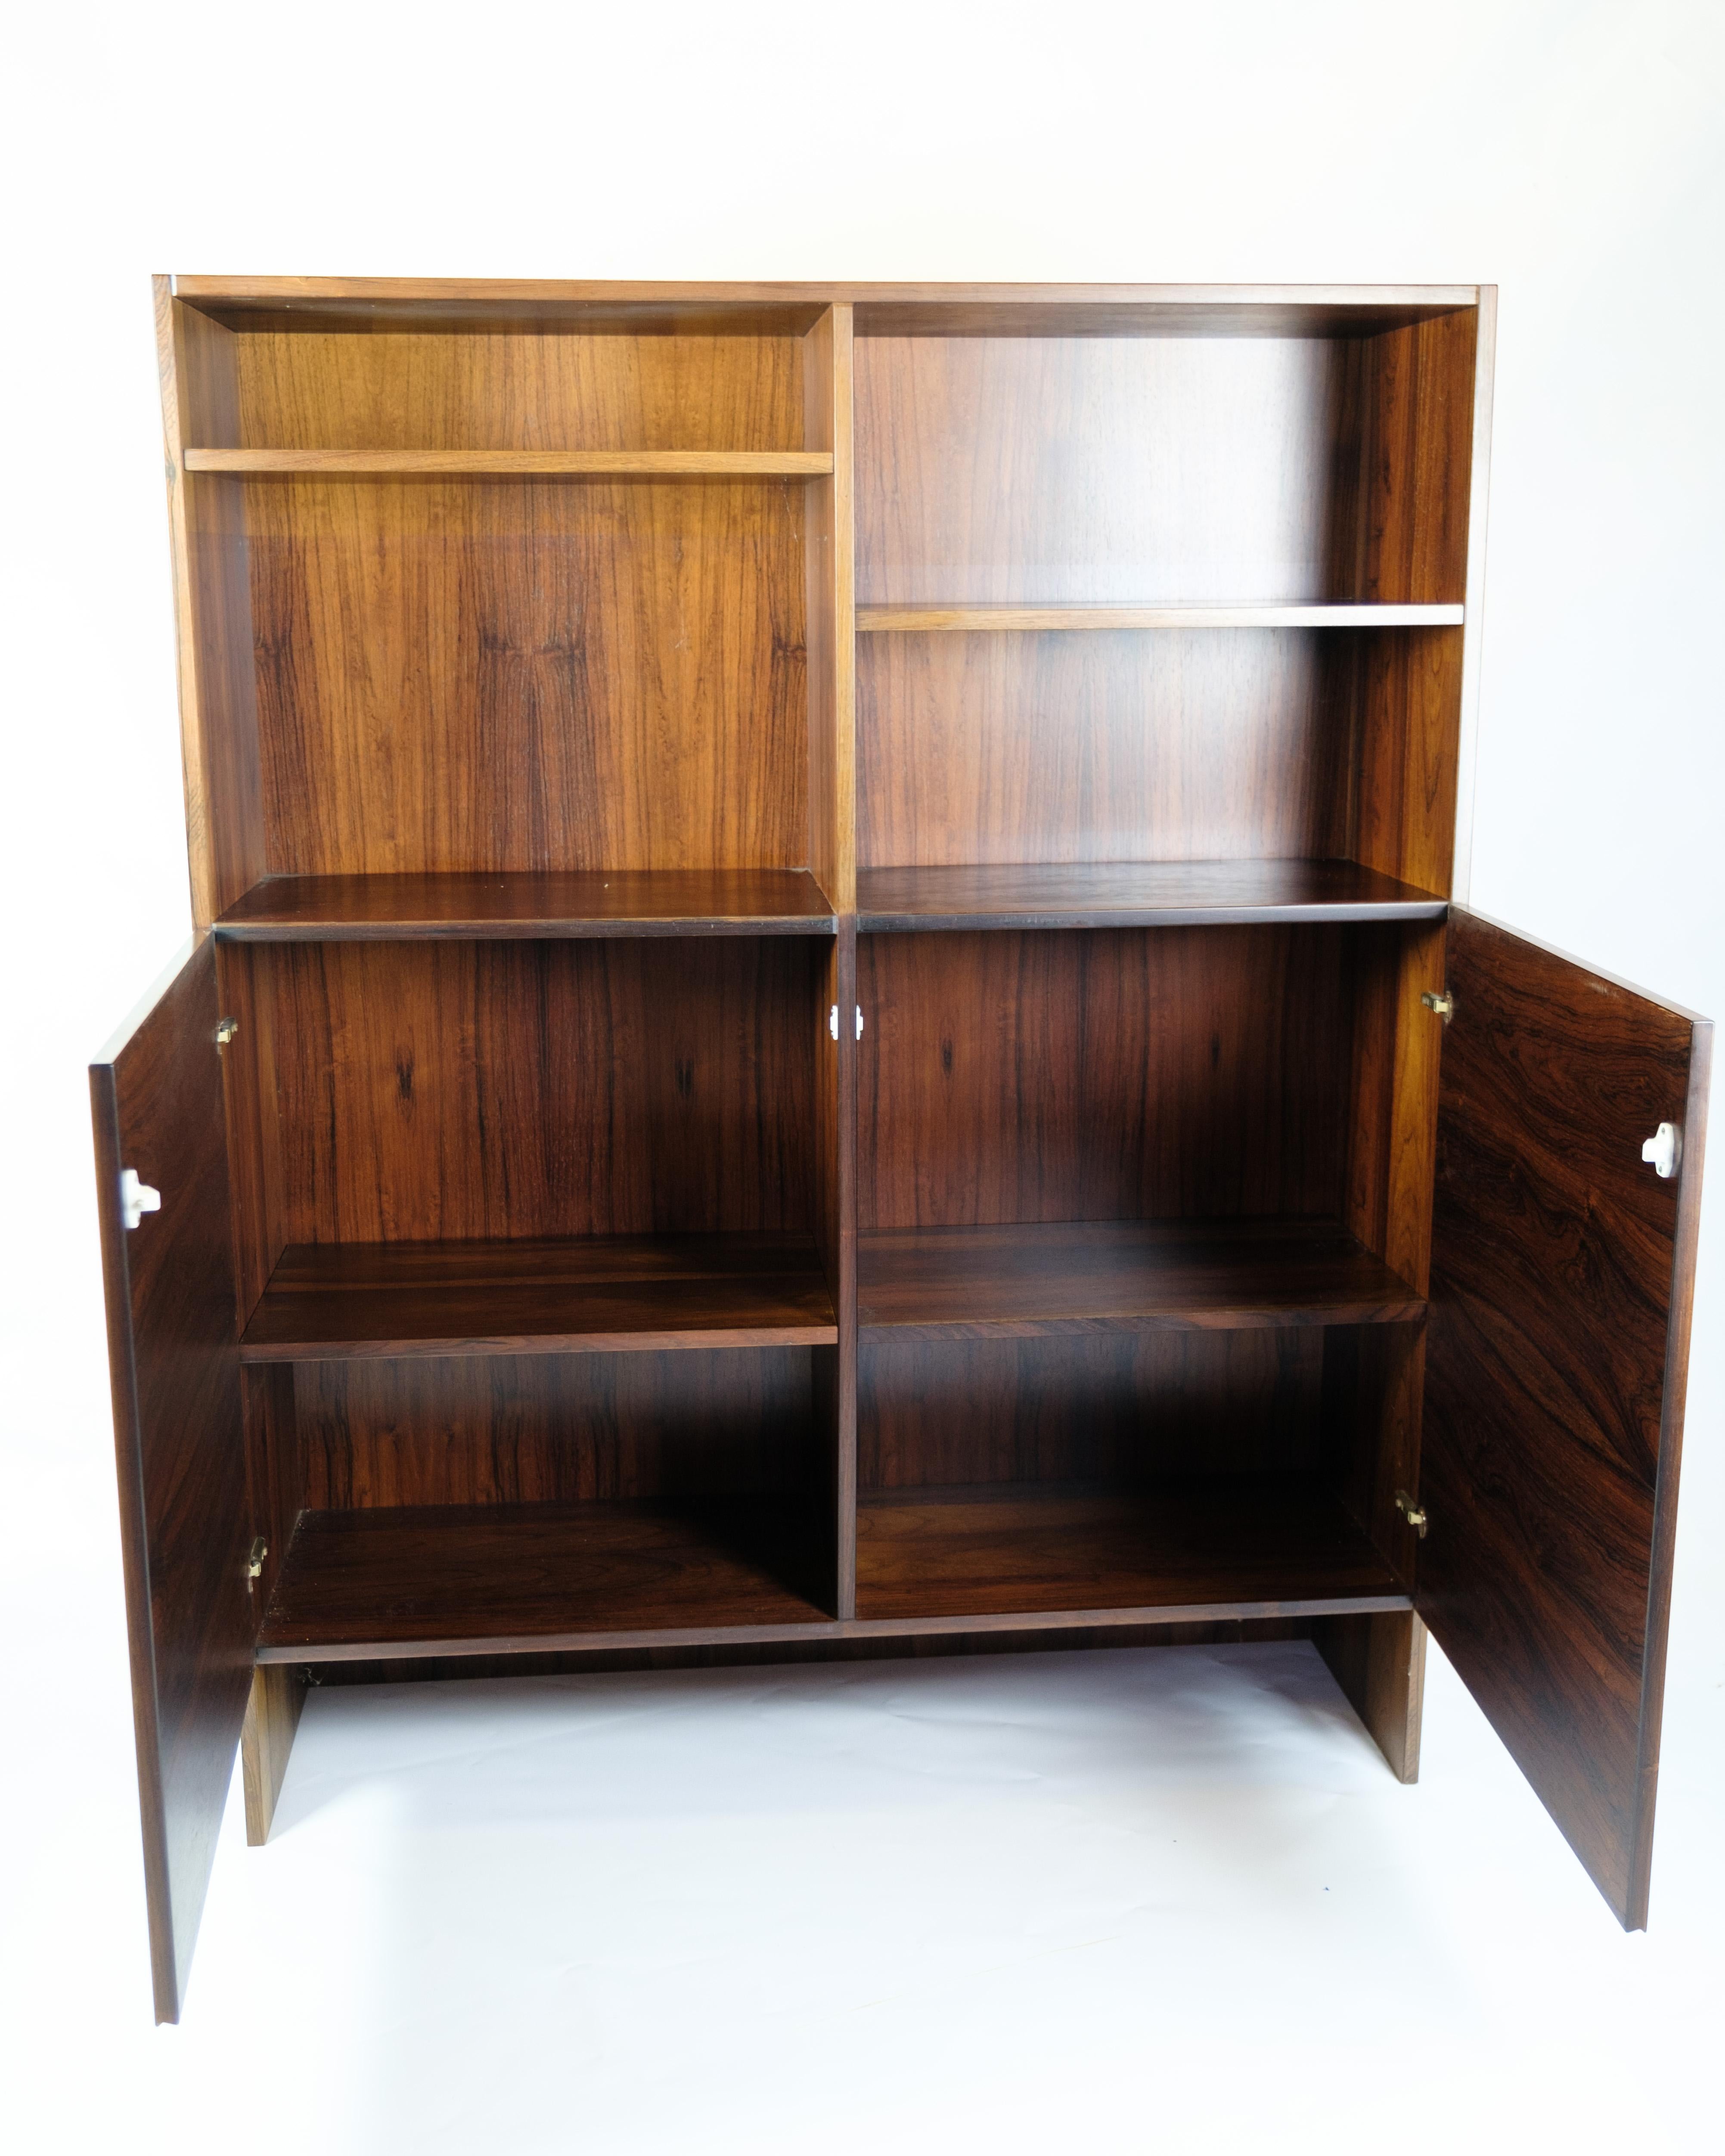 Bookcase Made In Rosewood, Danish Design From 1960s In Good Condition For Sale In Lejre, DK